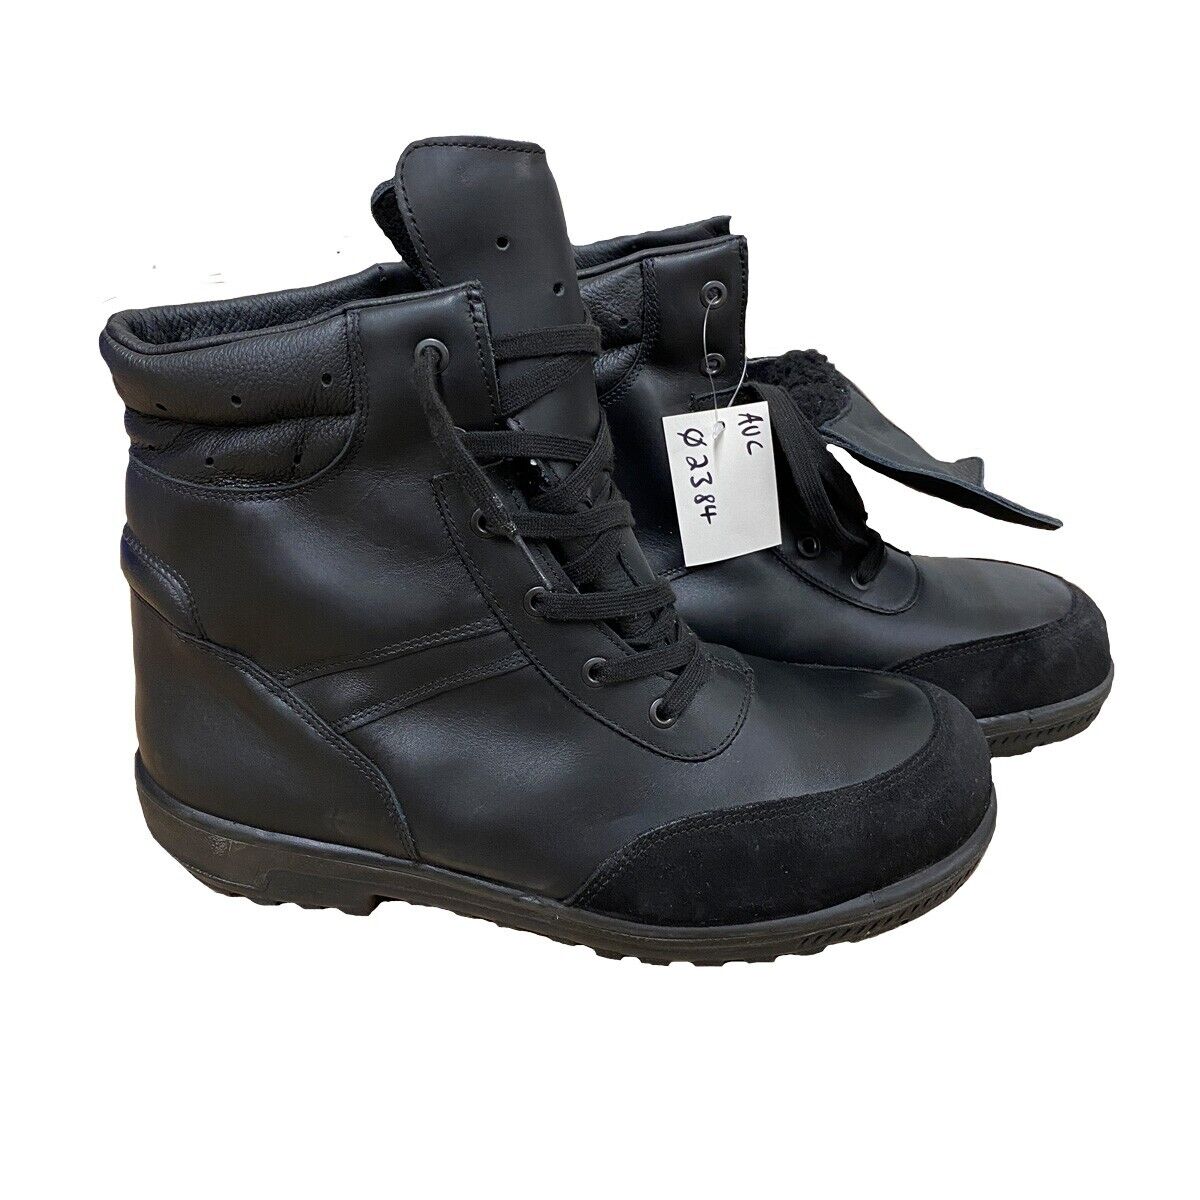 Original German Army BW Combat Boots - Moulded Sole